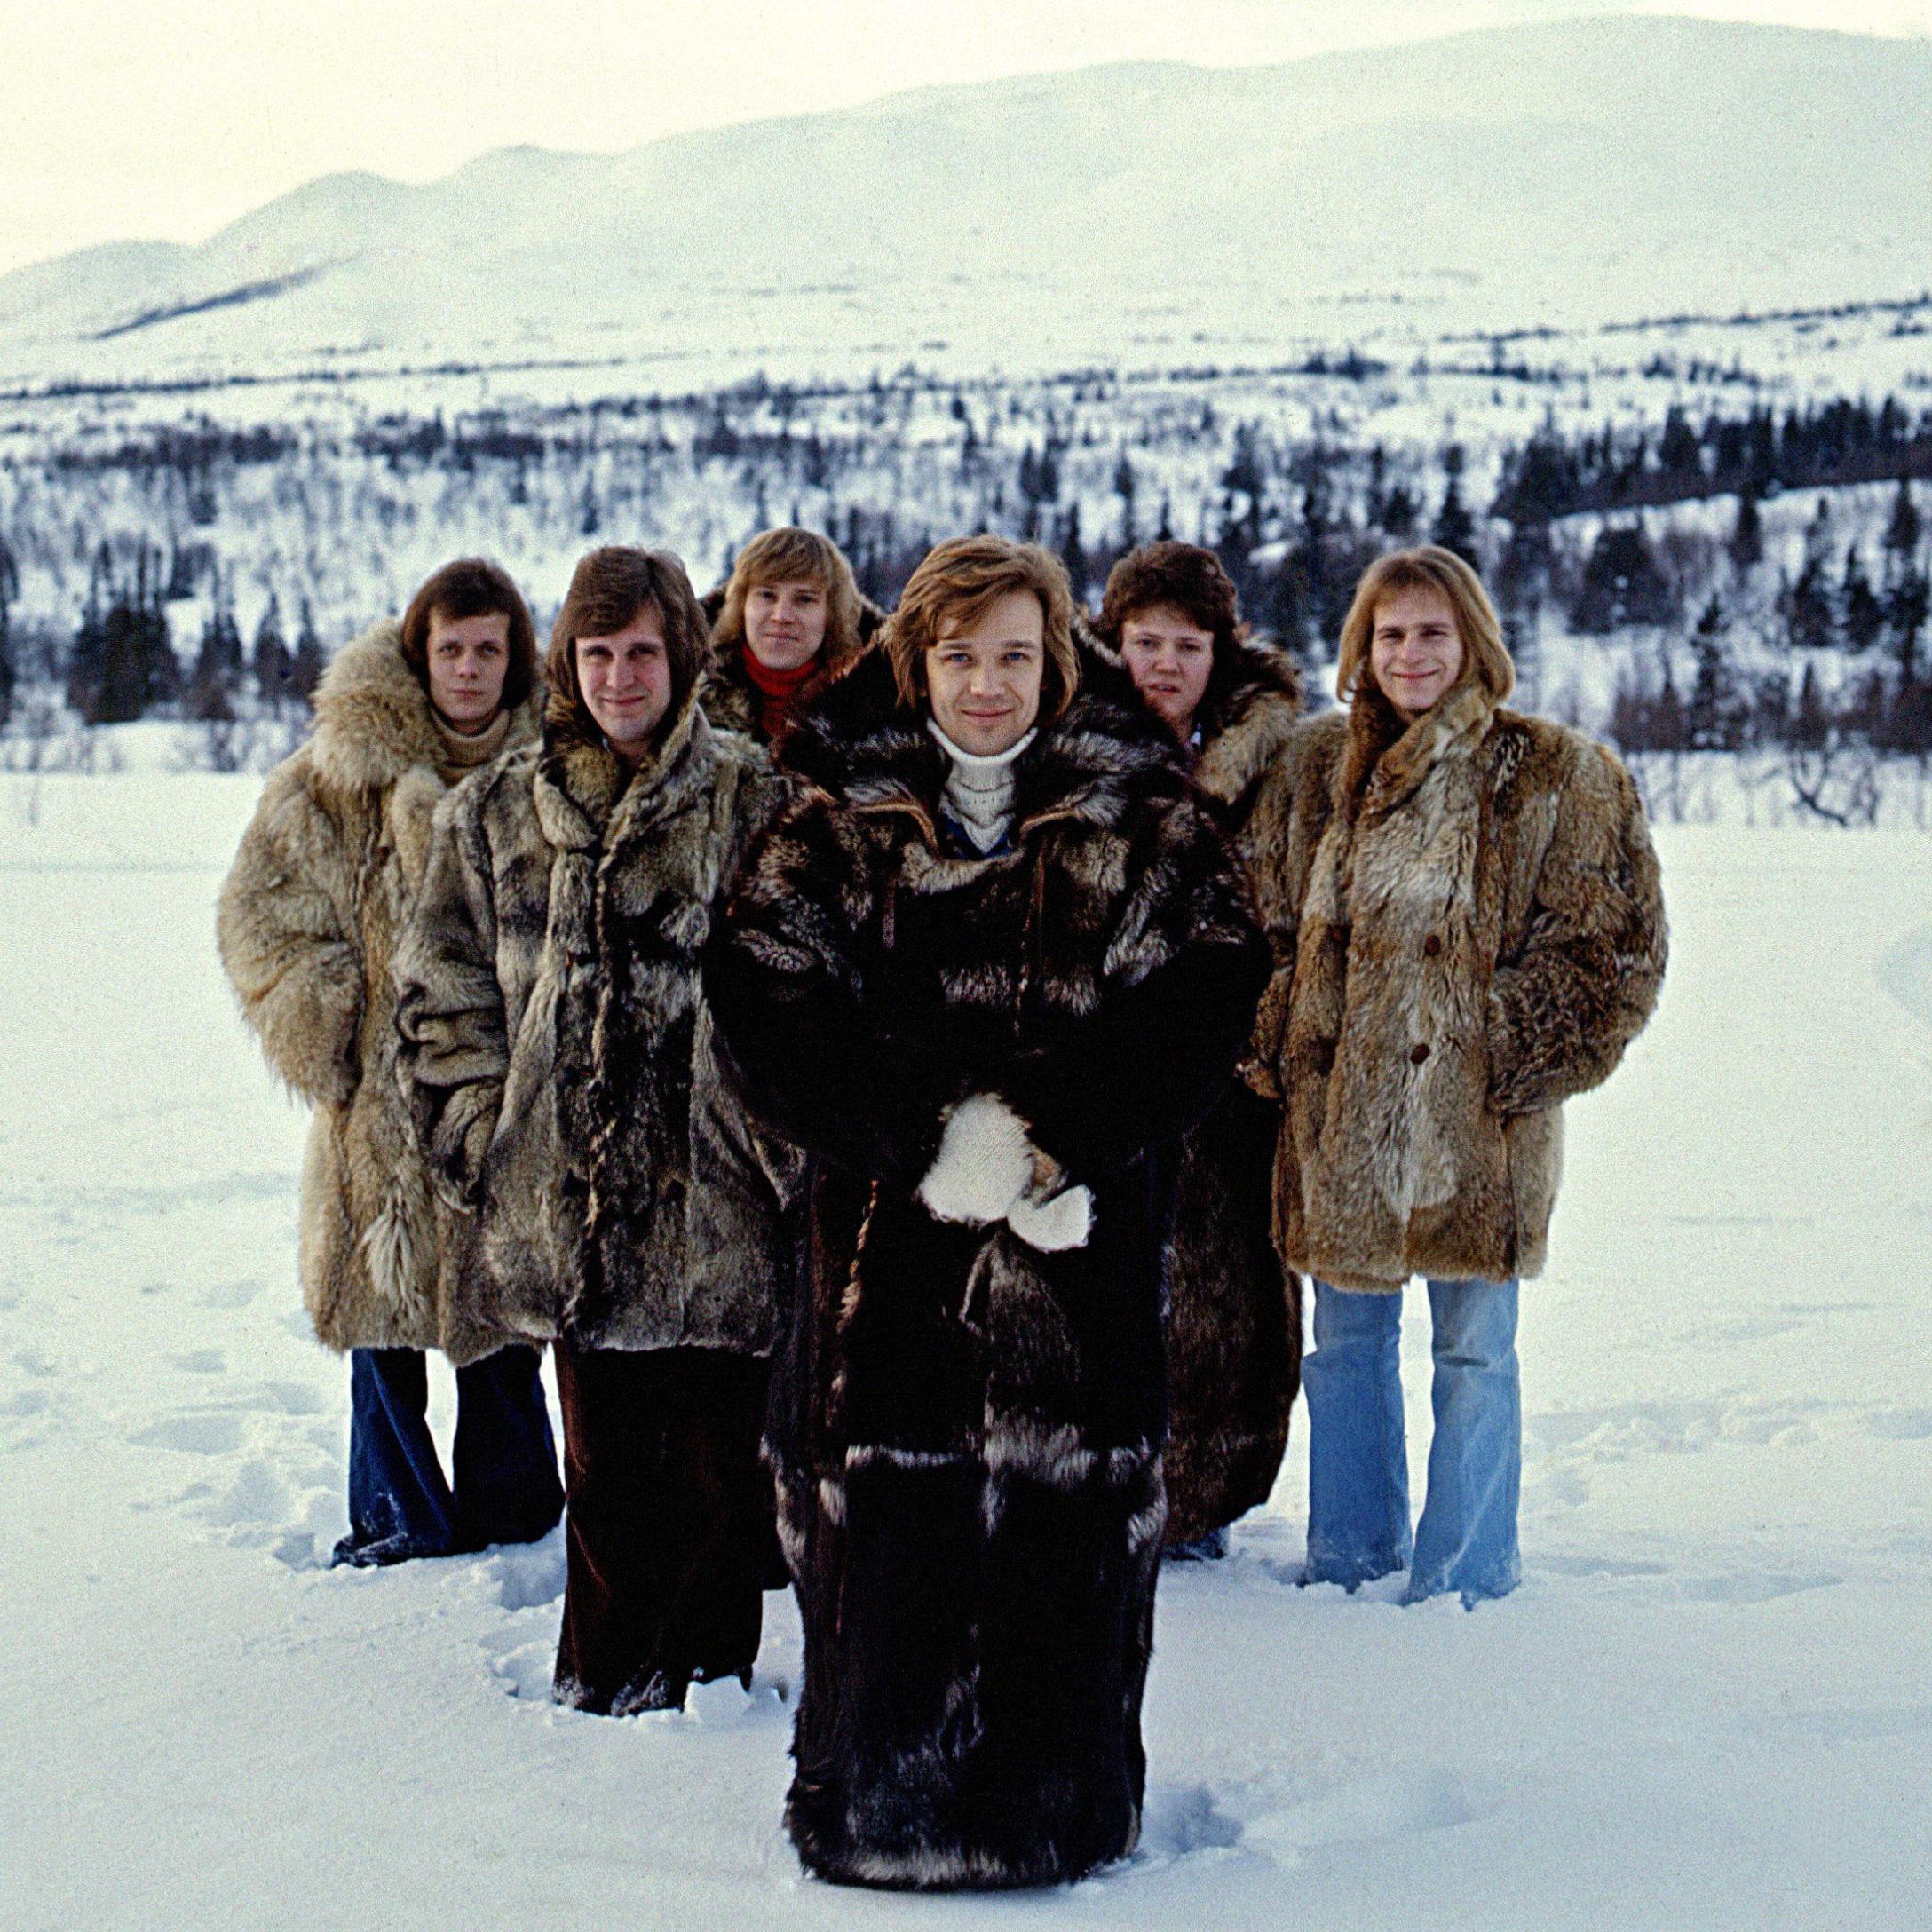 The band Blue Sweden portrayed outdoors, in a wintry landscape, all wearing fur coats.